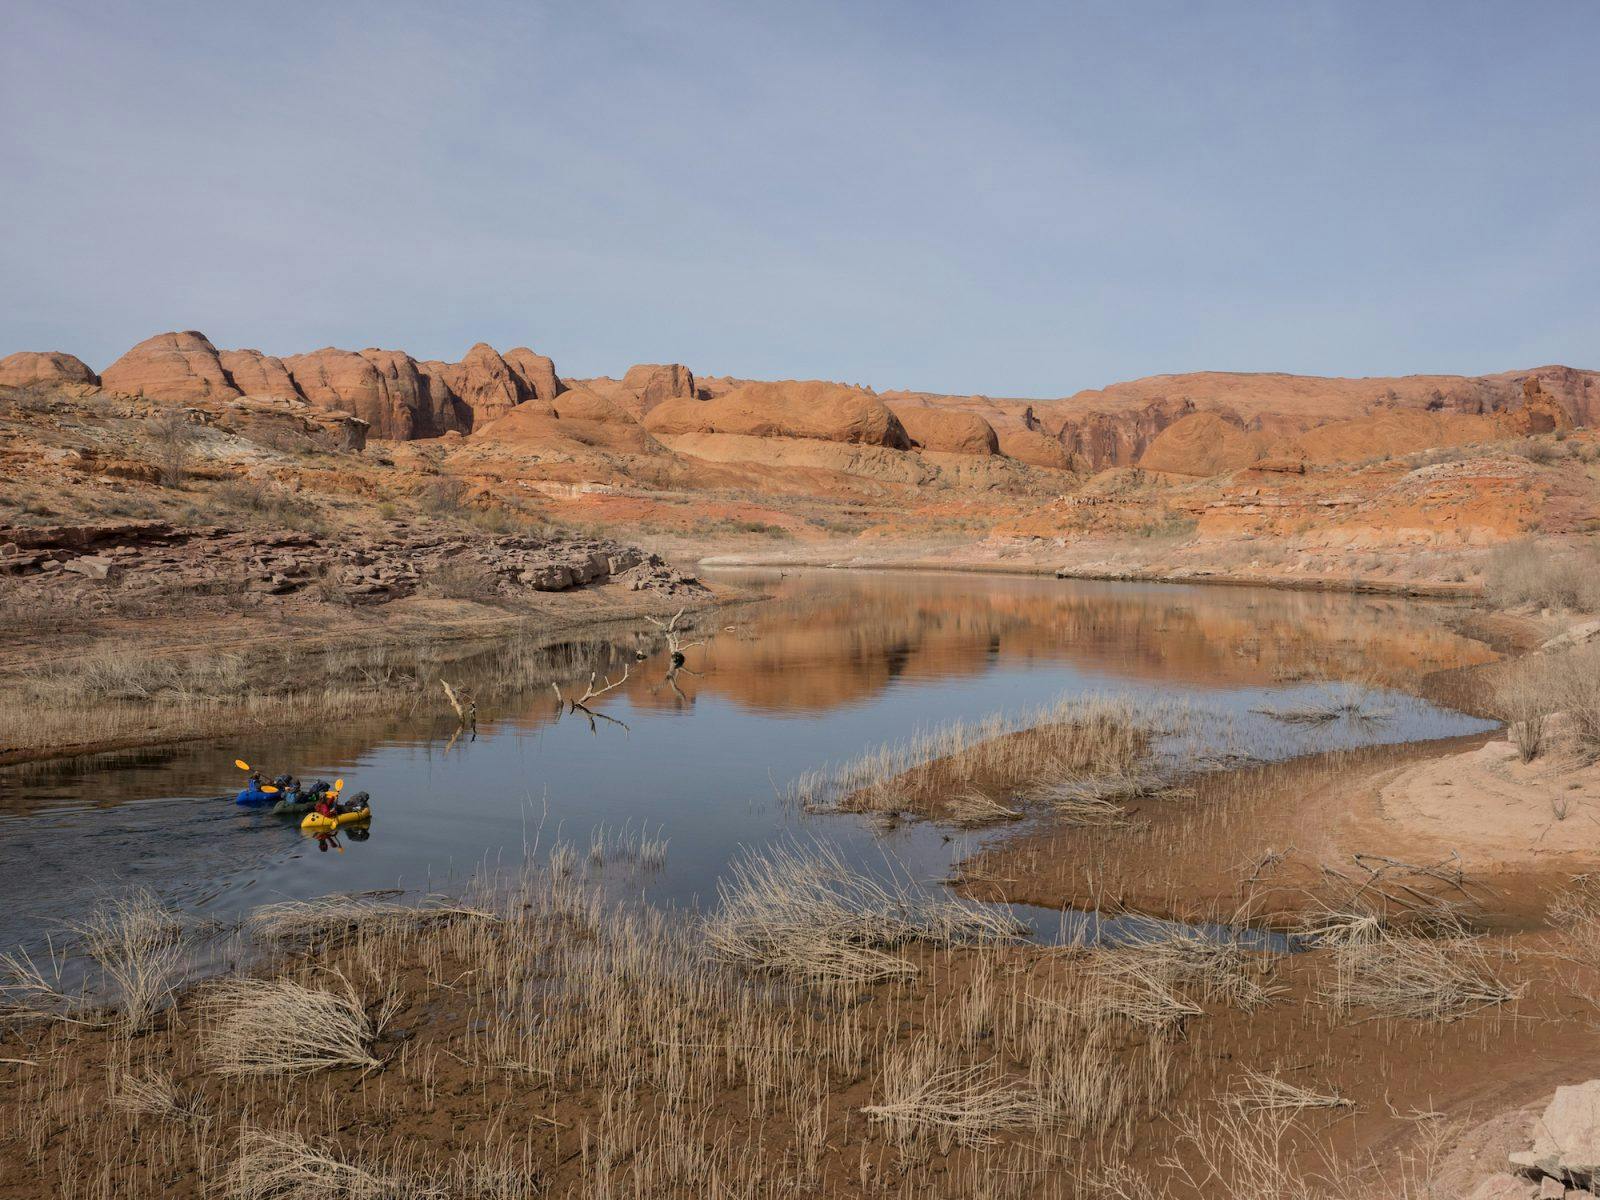 Paddling into a wild and desolate landscape.